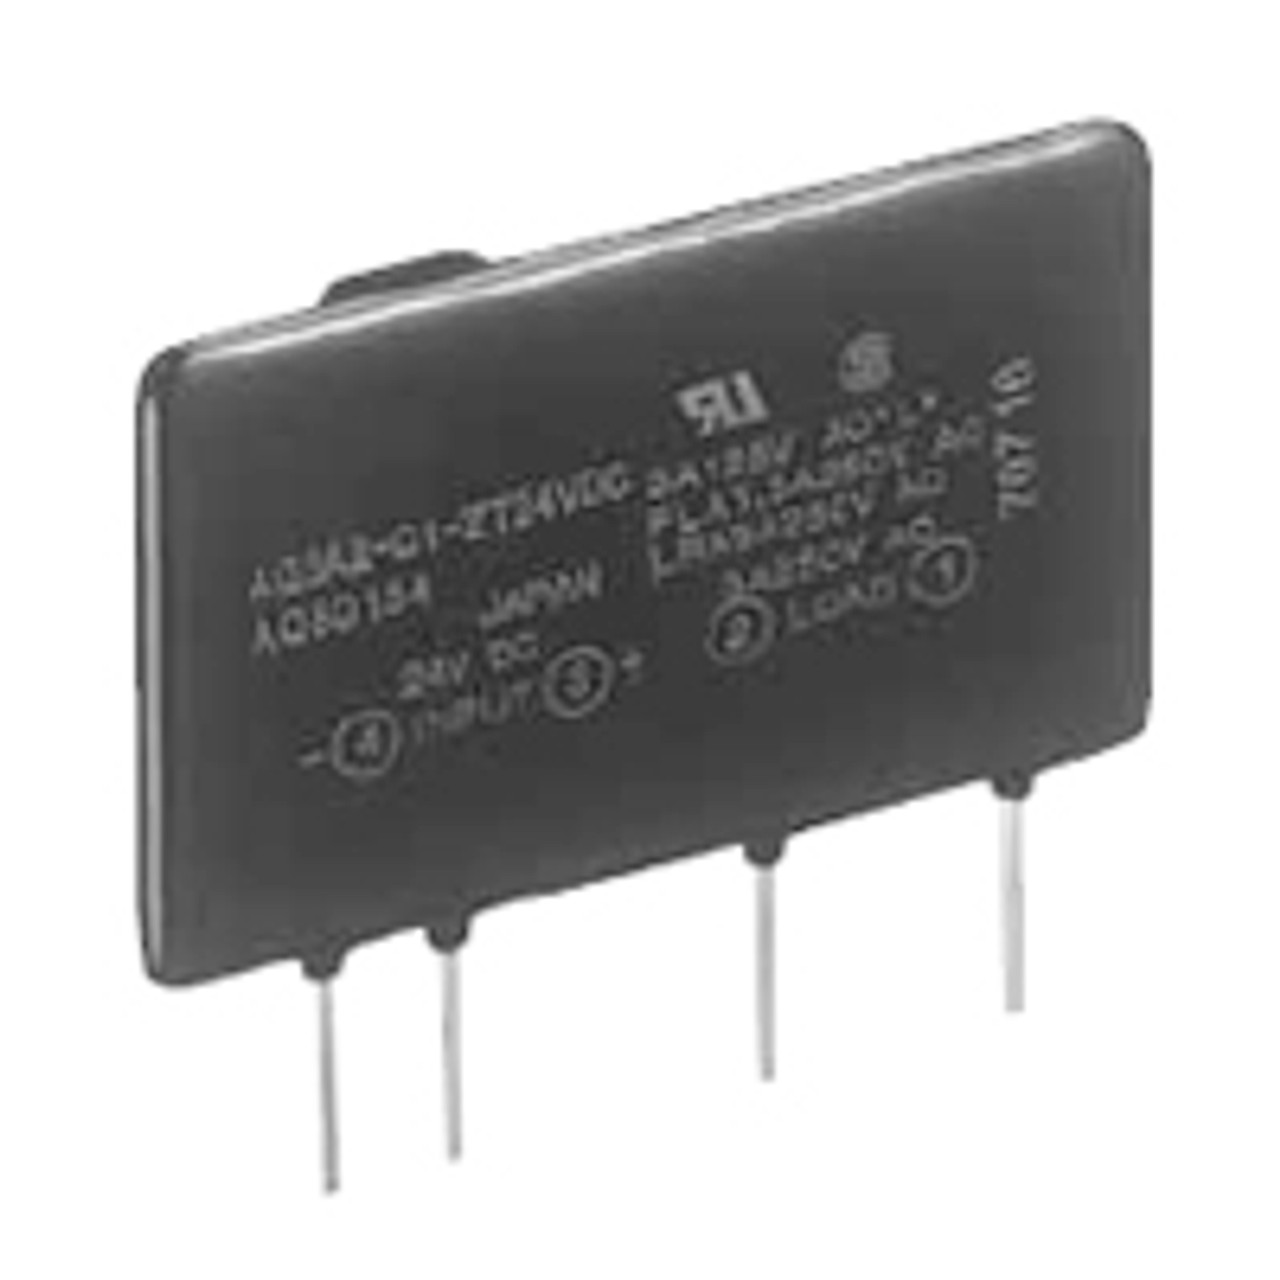 Panasonic Electric Works AQ3A1-C1-T5VDC Solid State